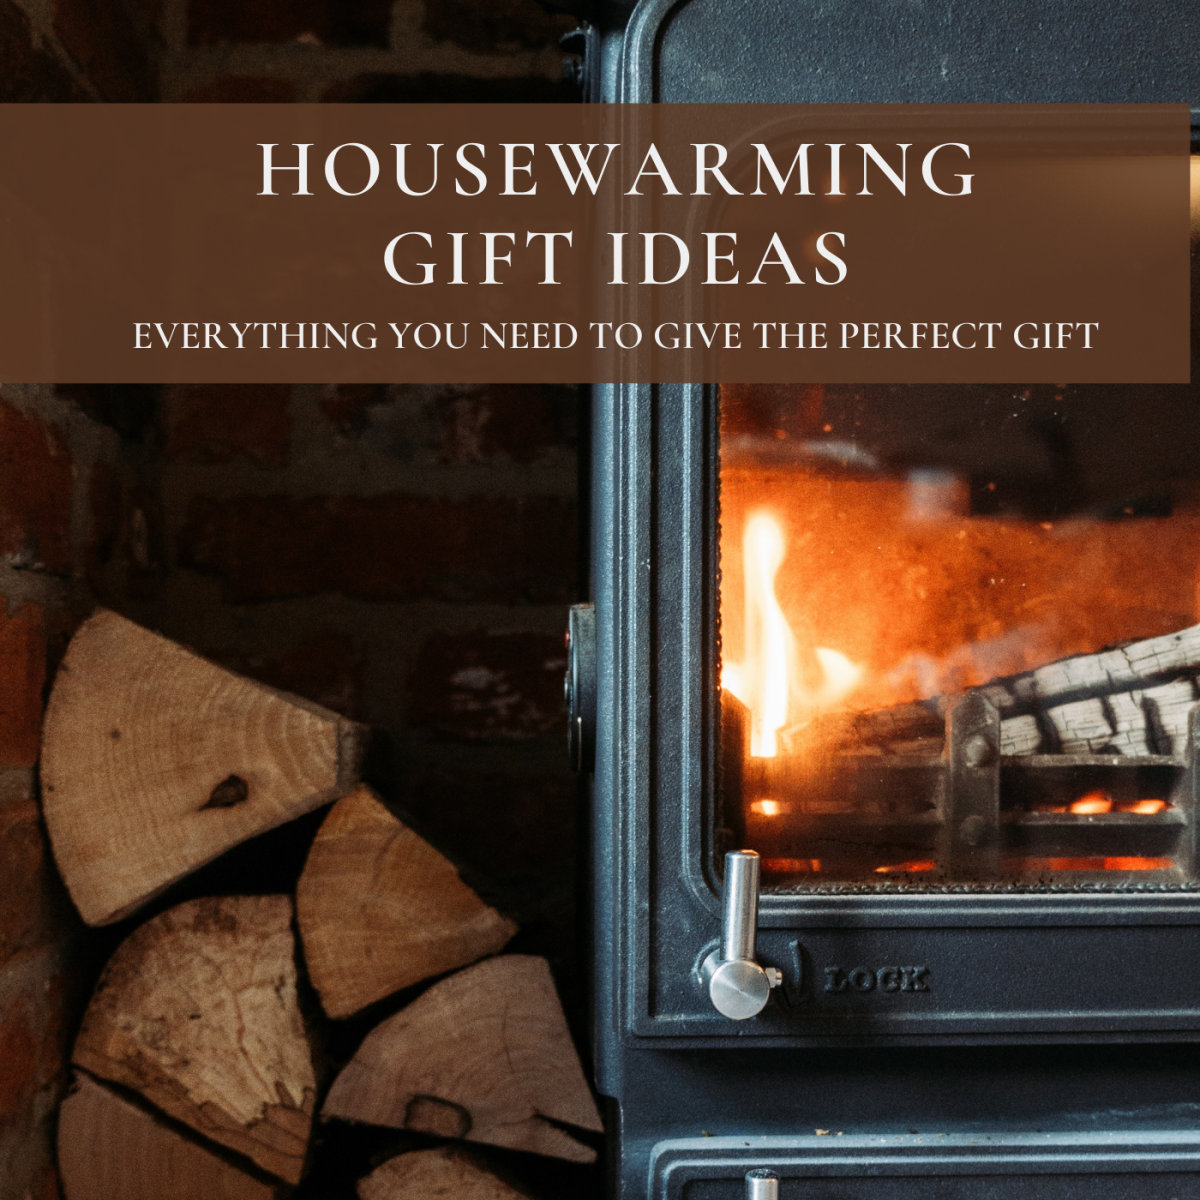 Best Housewarming Gift Ideas From Traditional to Quirky